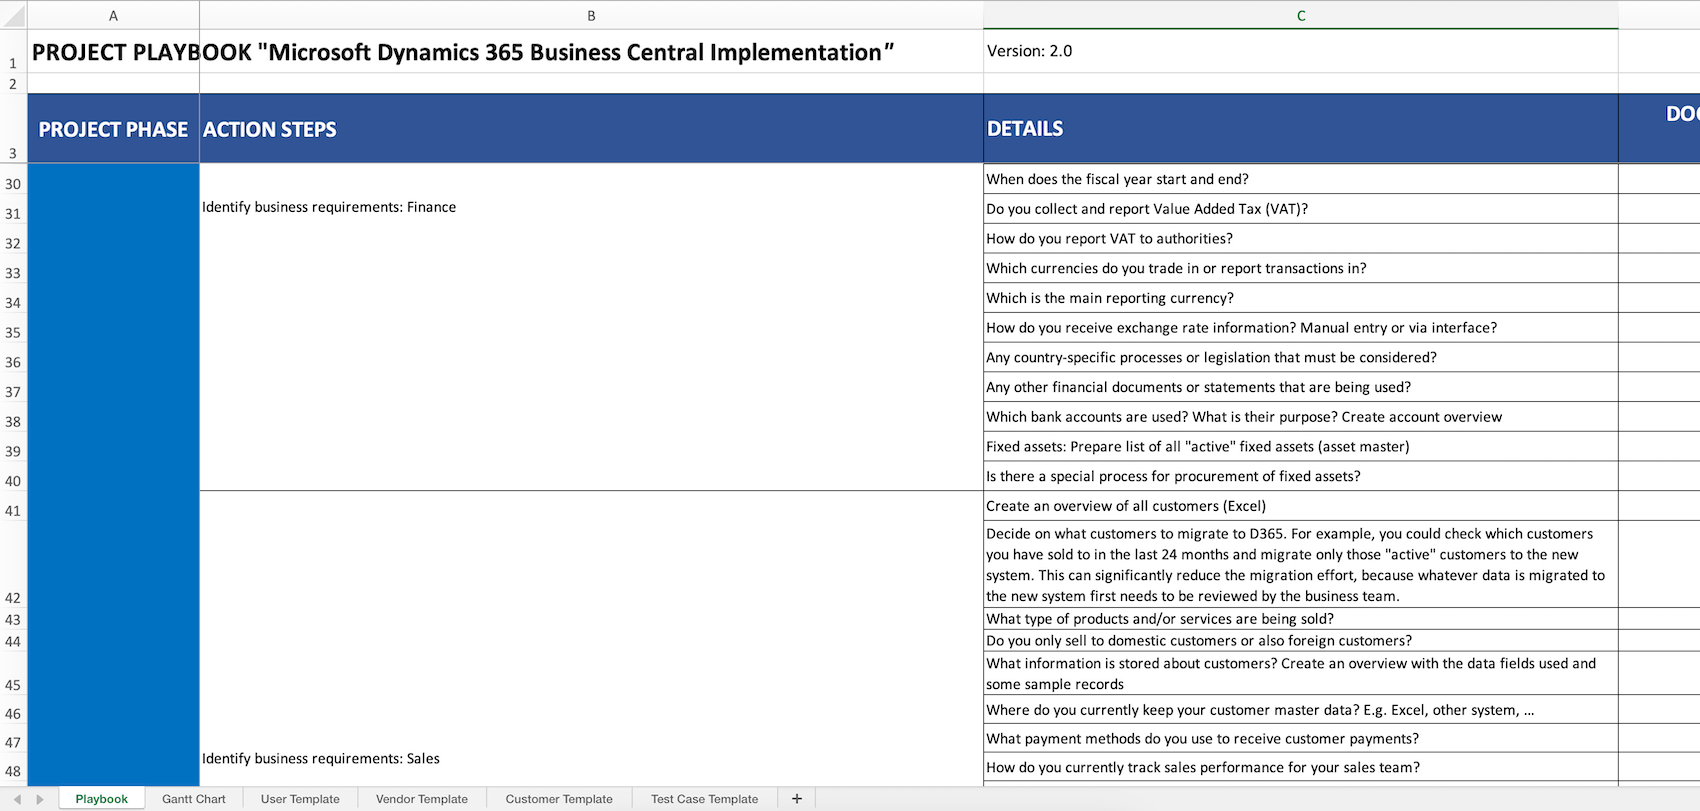 The Dynamics 365 Implementation Playbook includes over 100 questions arranged in a checklist format to help you identify the business requirements for each process.